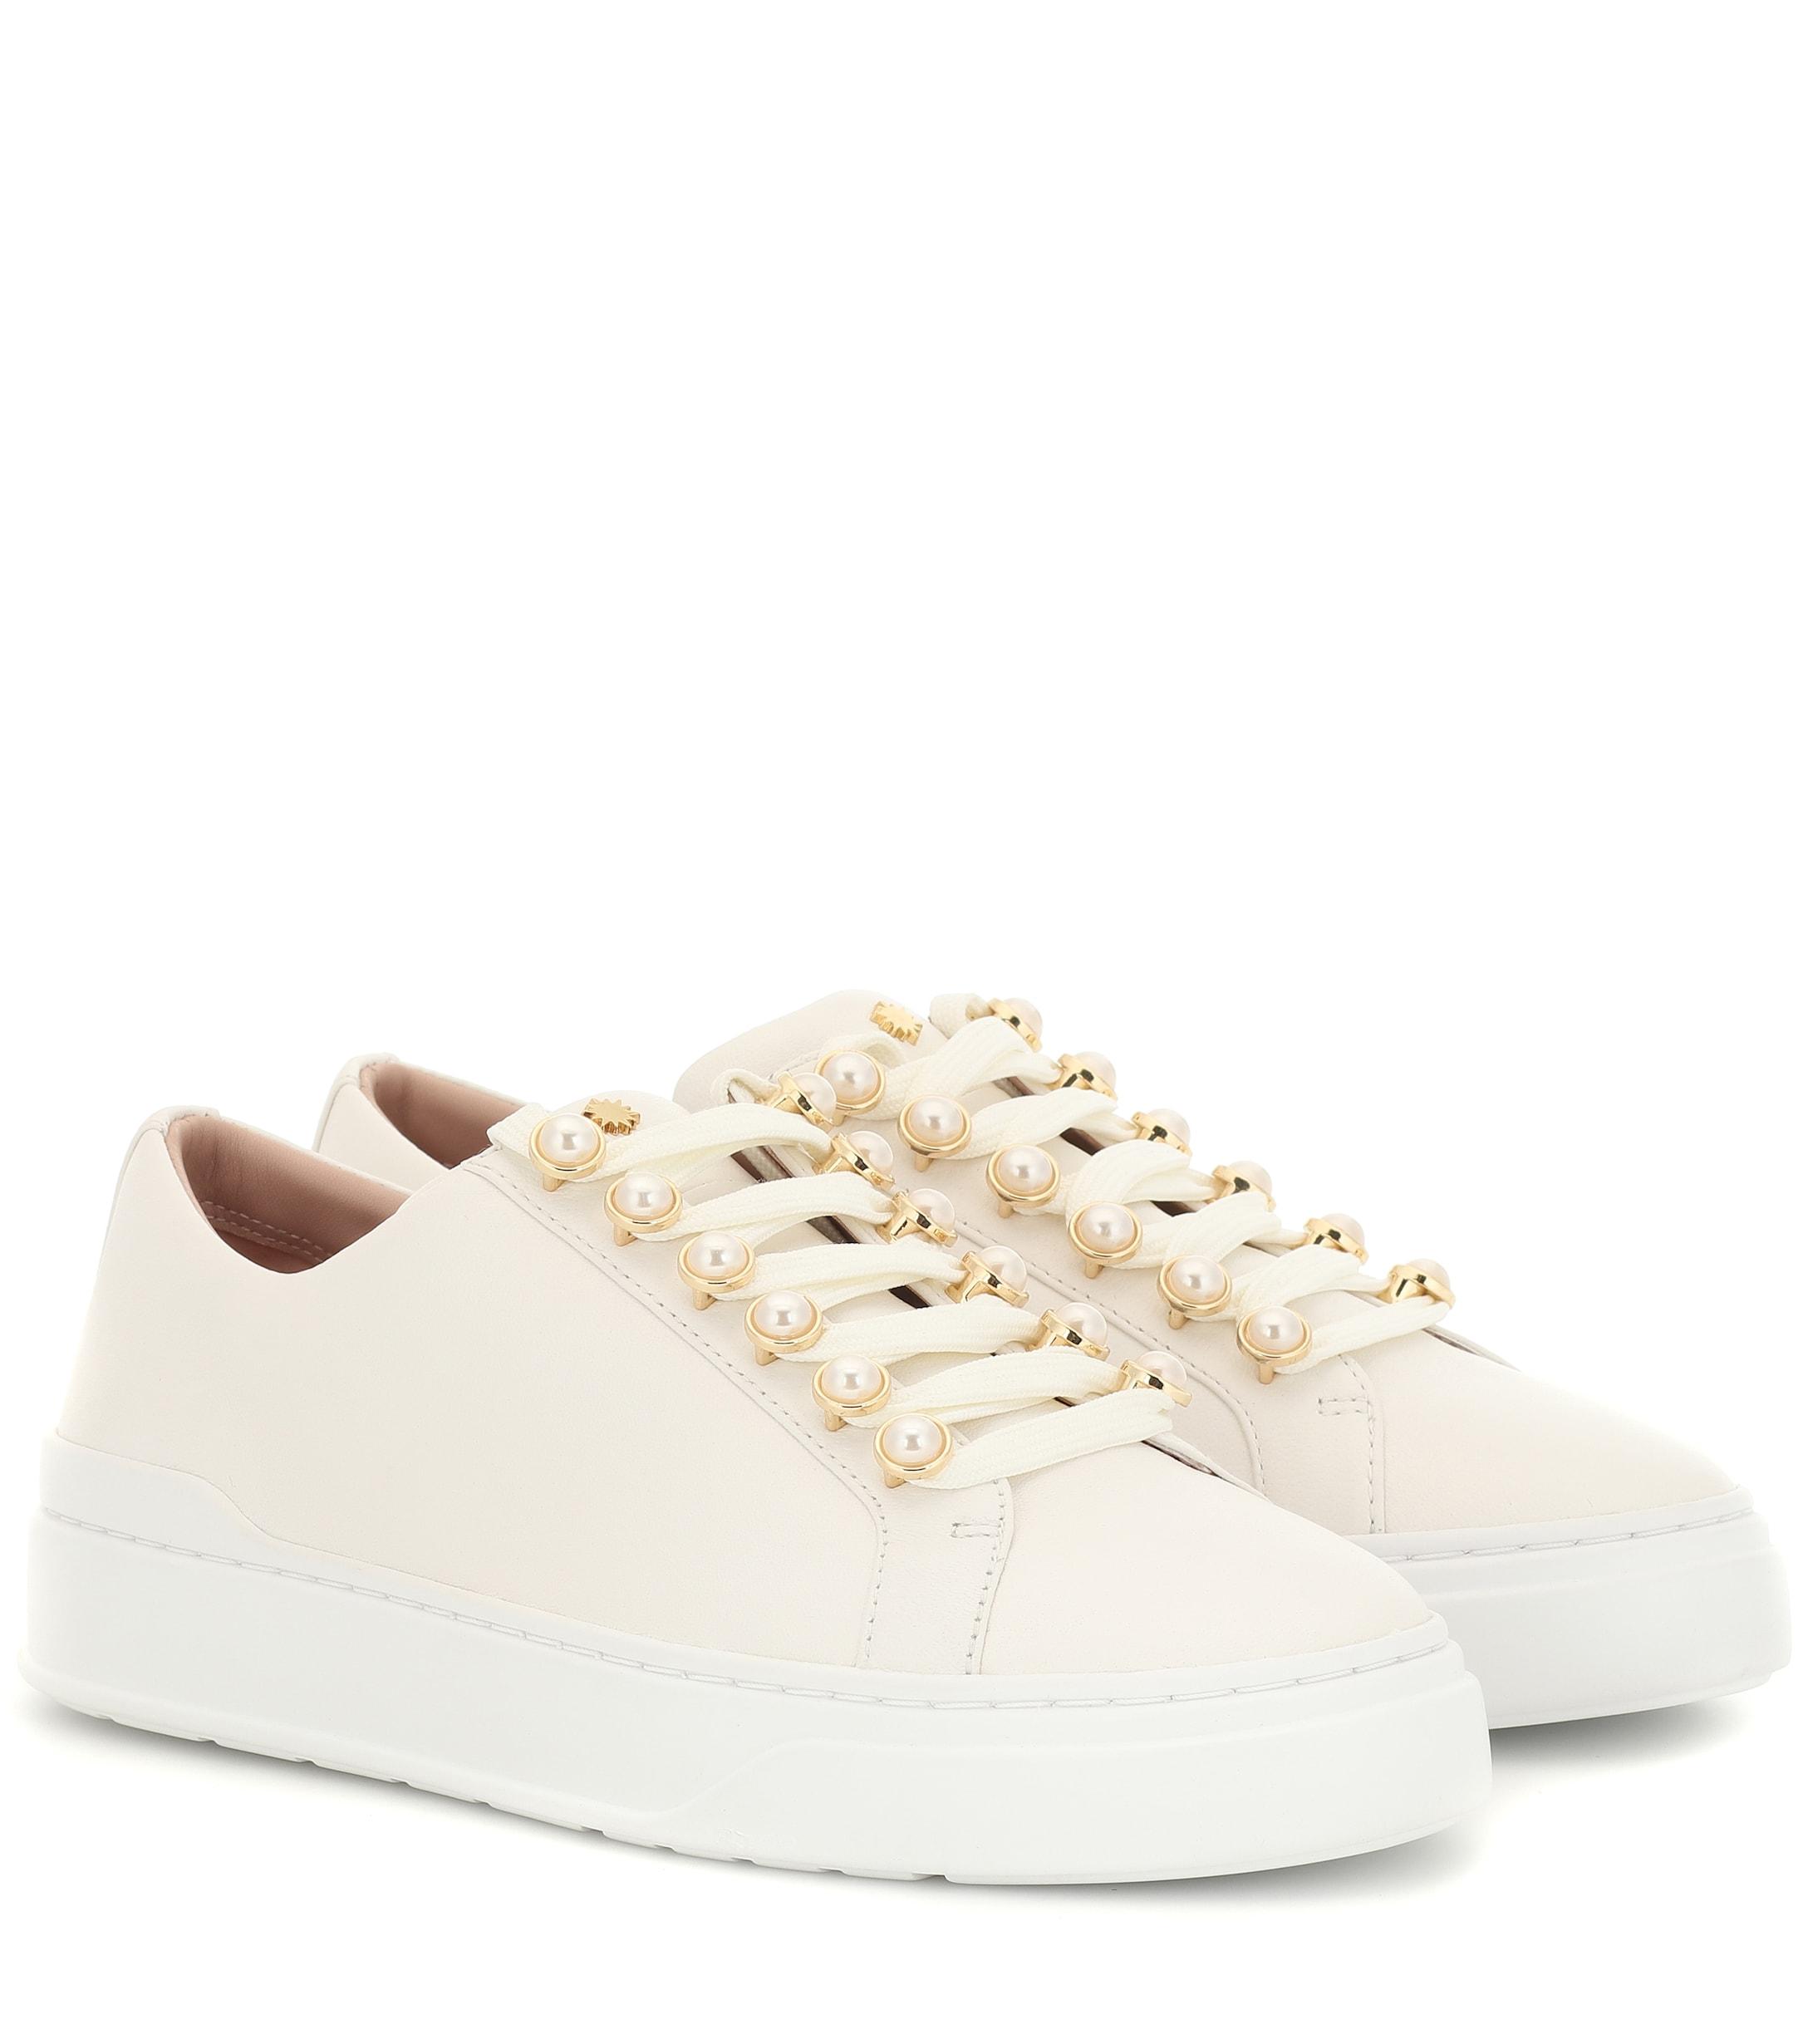 Stuart Weitzman Excelsa Leather Sneakers in White - Lyst